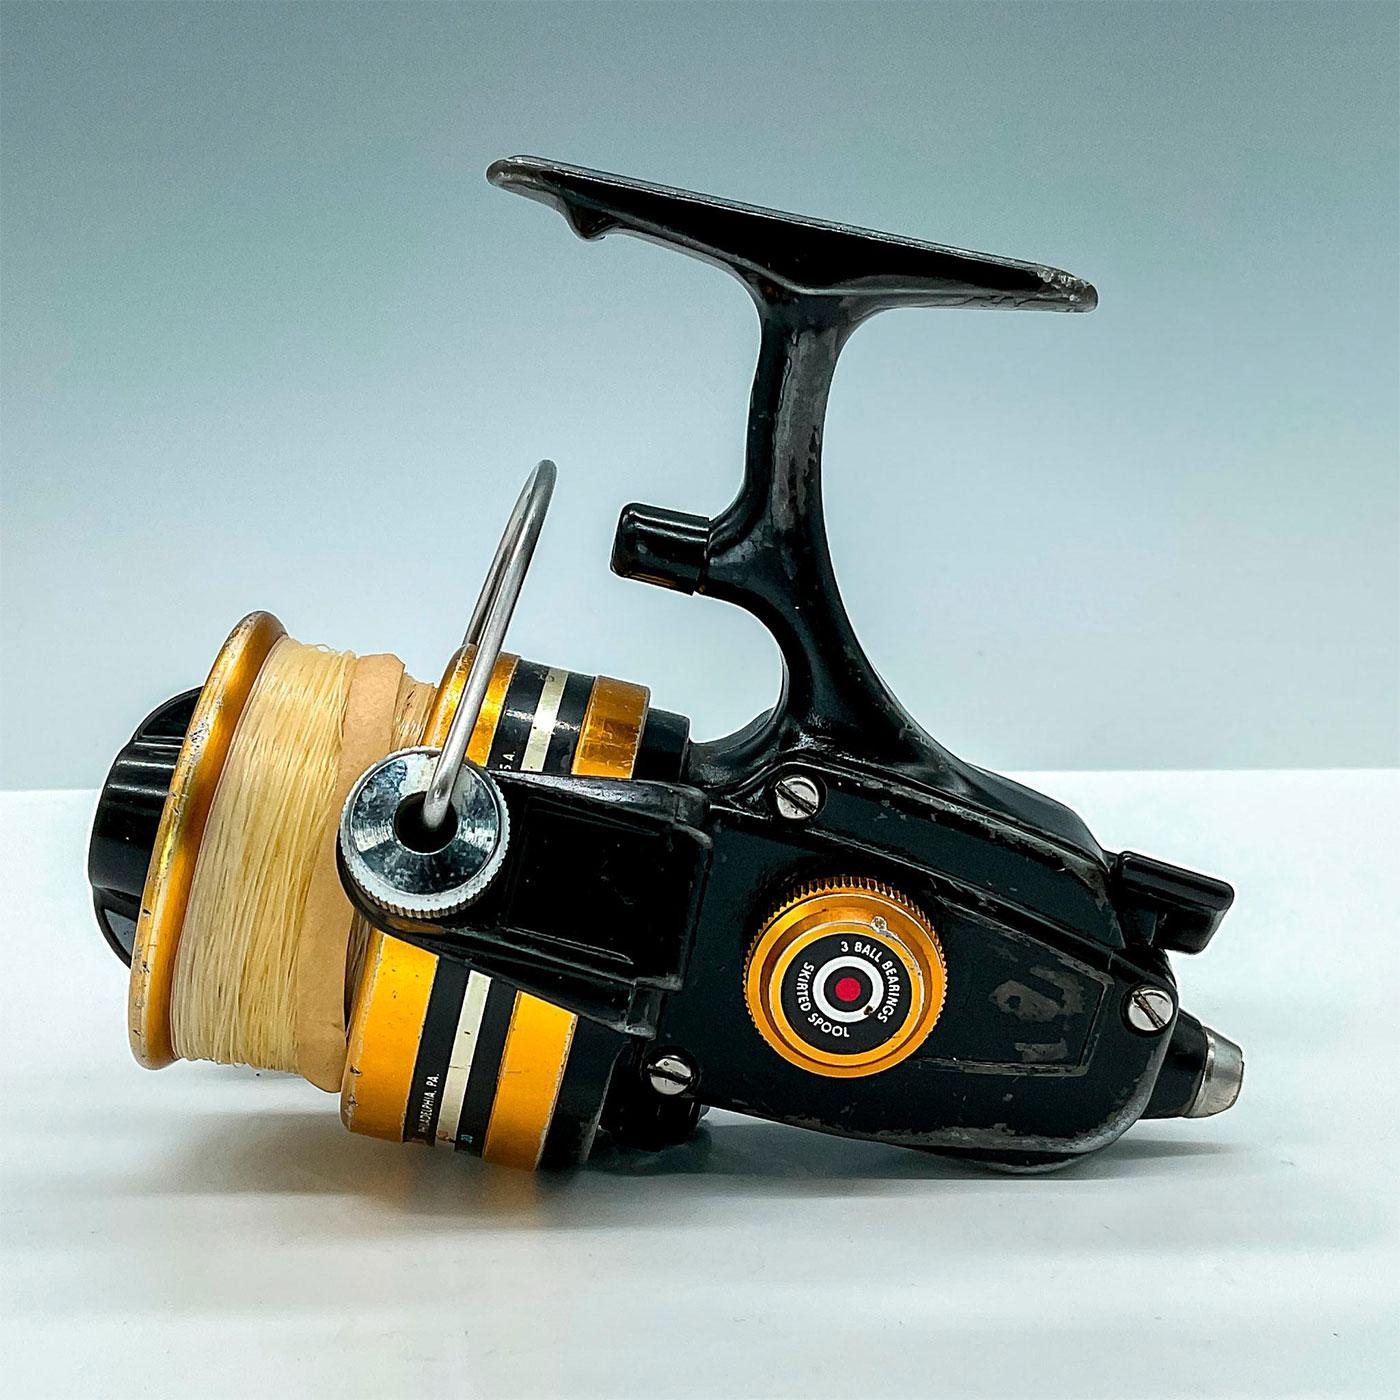 Sold at Auction: Penn Fishing Reels